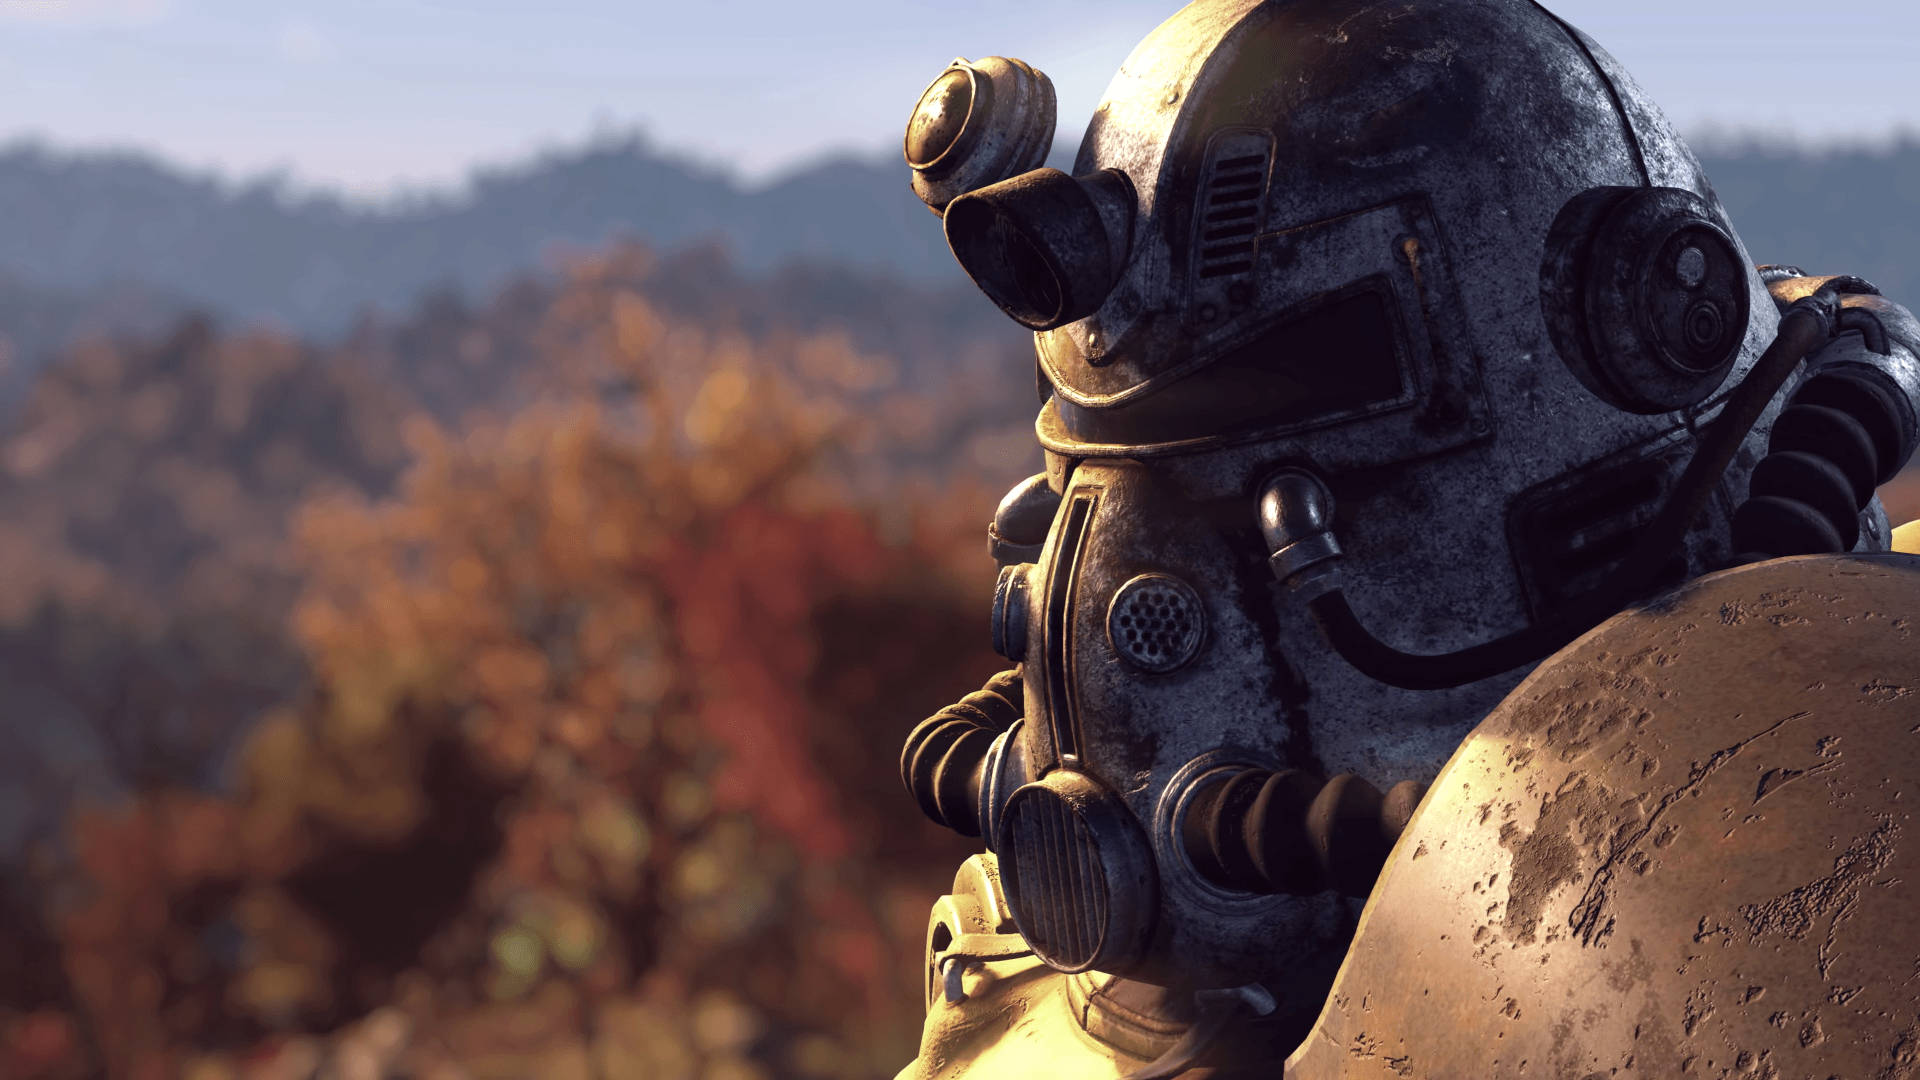 Power Up With The High-tech Power Armor From Fallout 76 Wallpaper